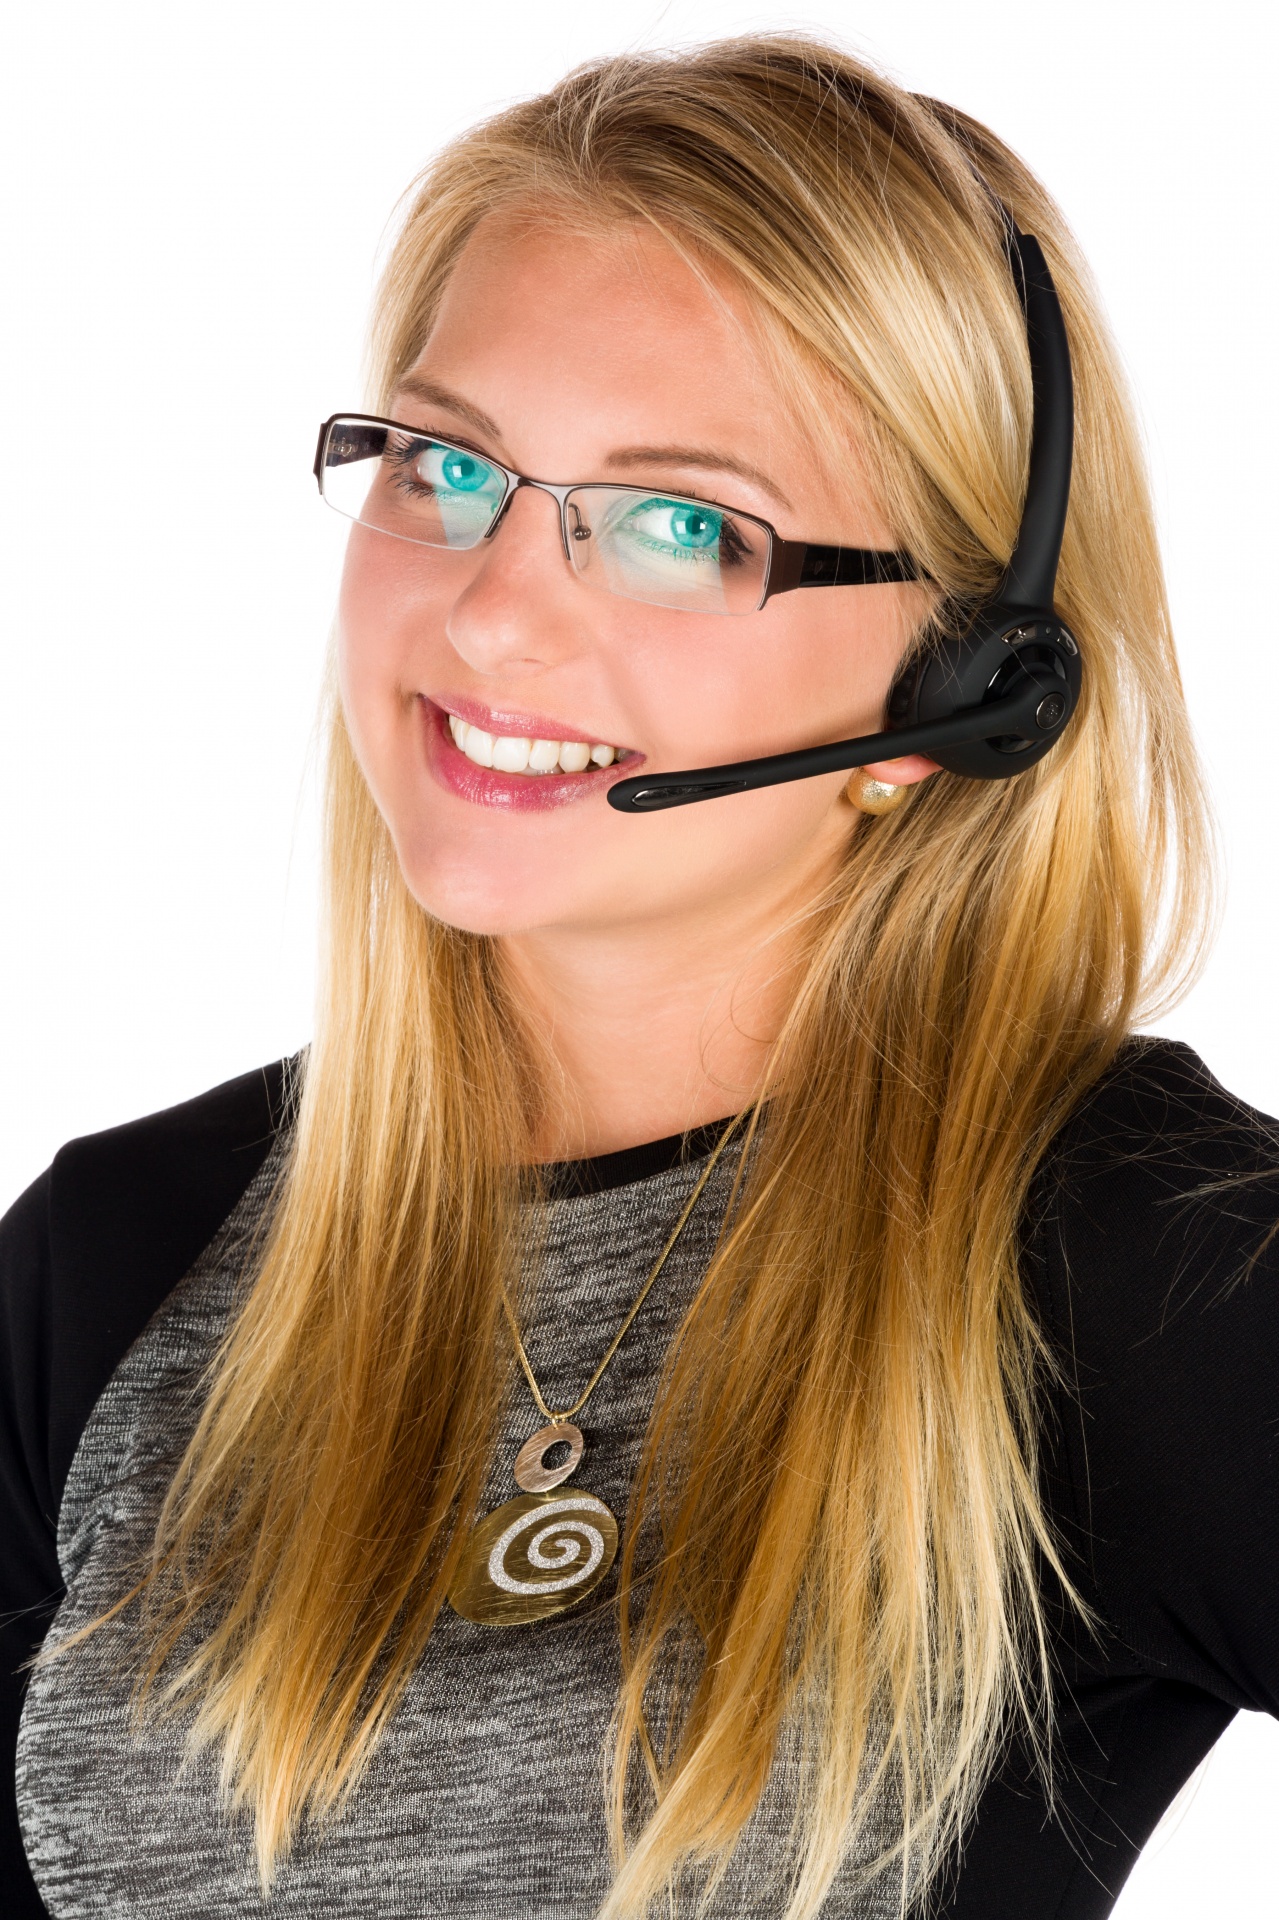 https://www.publicdomainpictures.net/pictures/210000/velka/business-woman-with-a-headset-1488653449akR.jpg